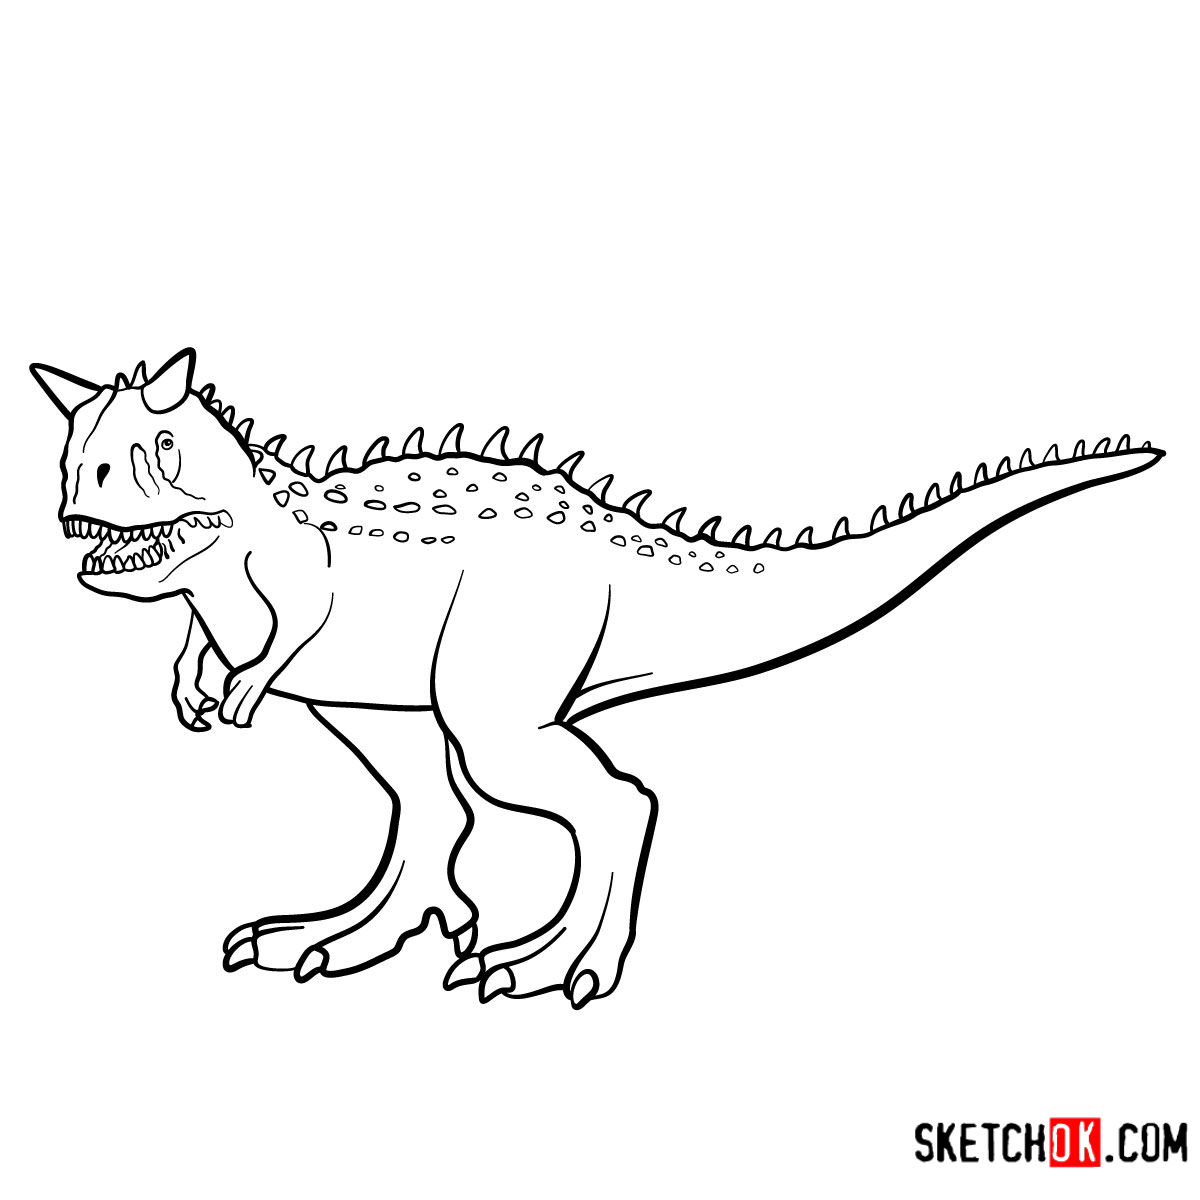 How to draw a Carnotaurus